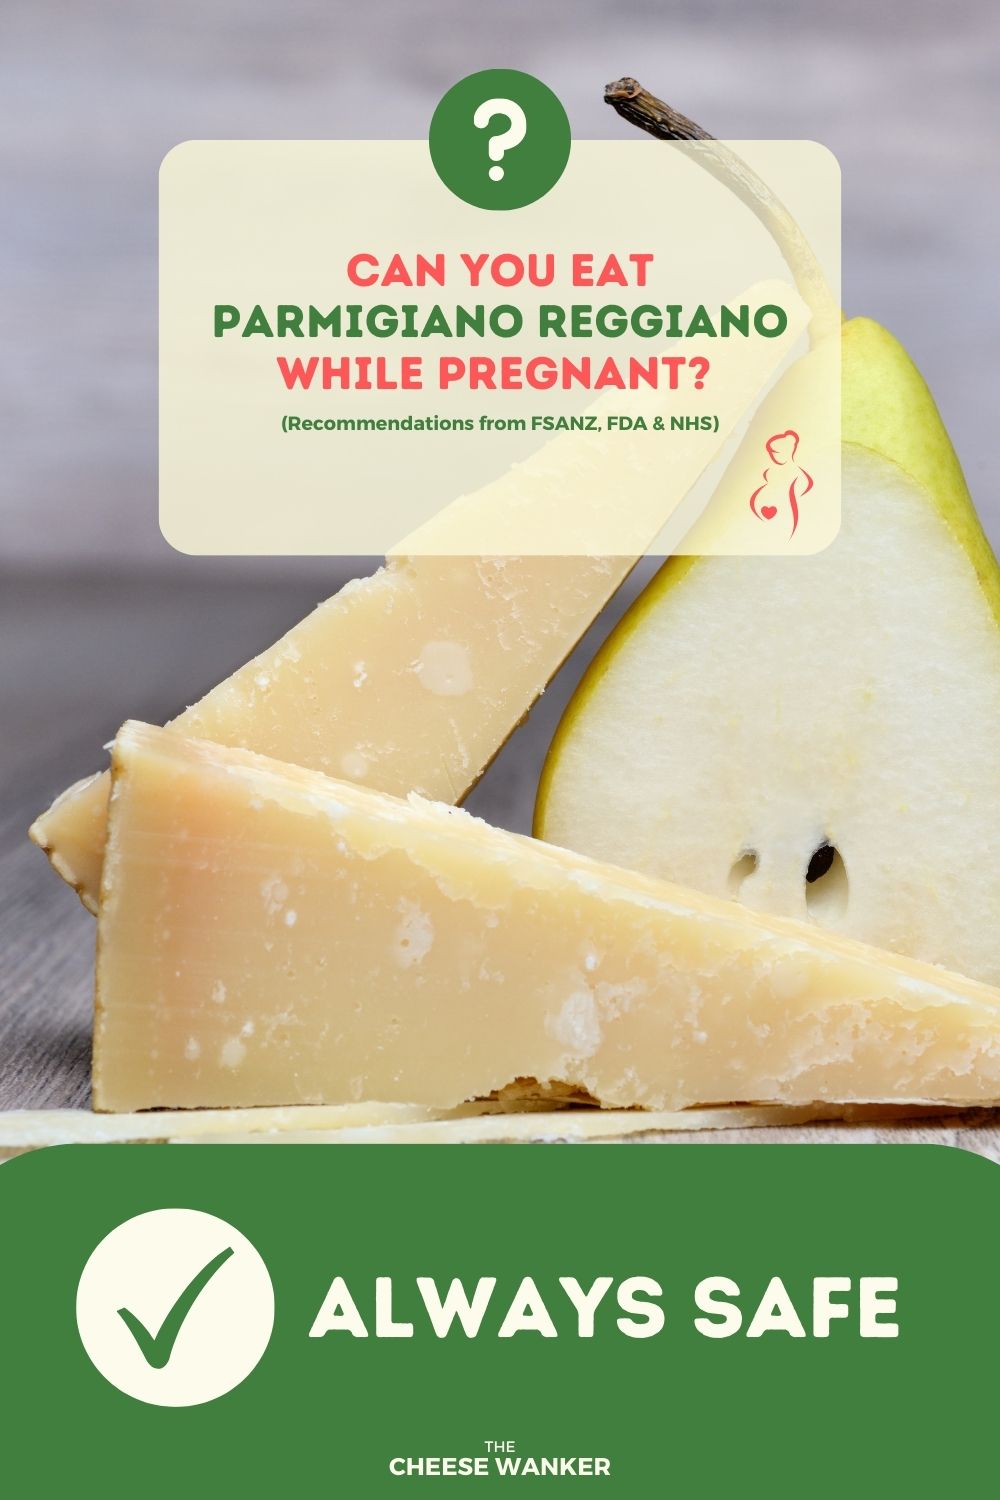 https://thecheesewanker.com/wp-content/uploads/2022/08/Can-You-Eat-Parmigiano-Reggiano-While-Pregnant-Pin.jpg